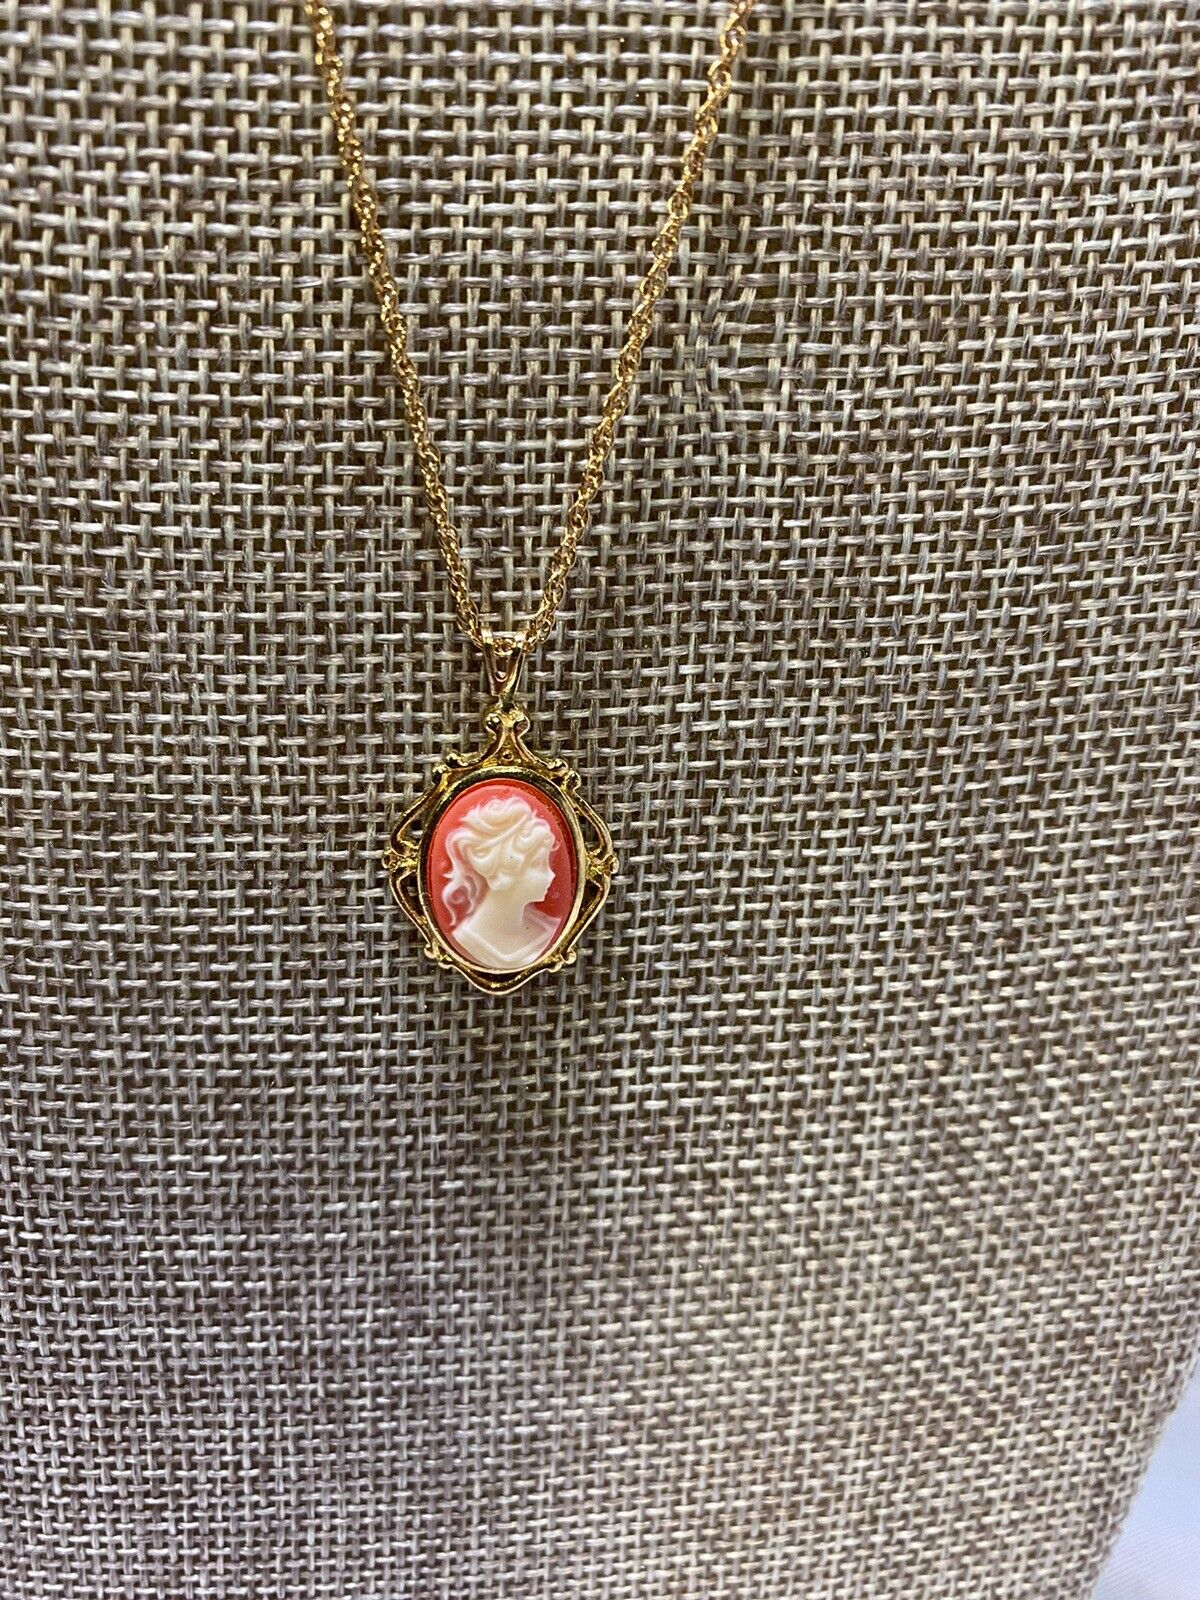 VTG REAL Cameo Gold Tone Metal Pendant Charm Coral Color Background For Necklace Cameo - фотография #3